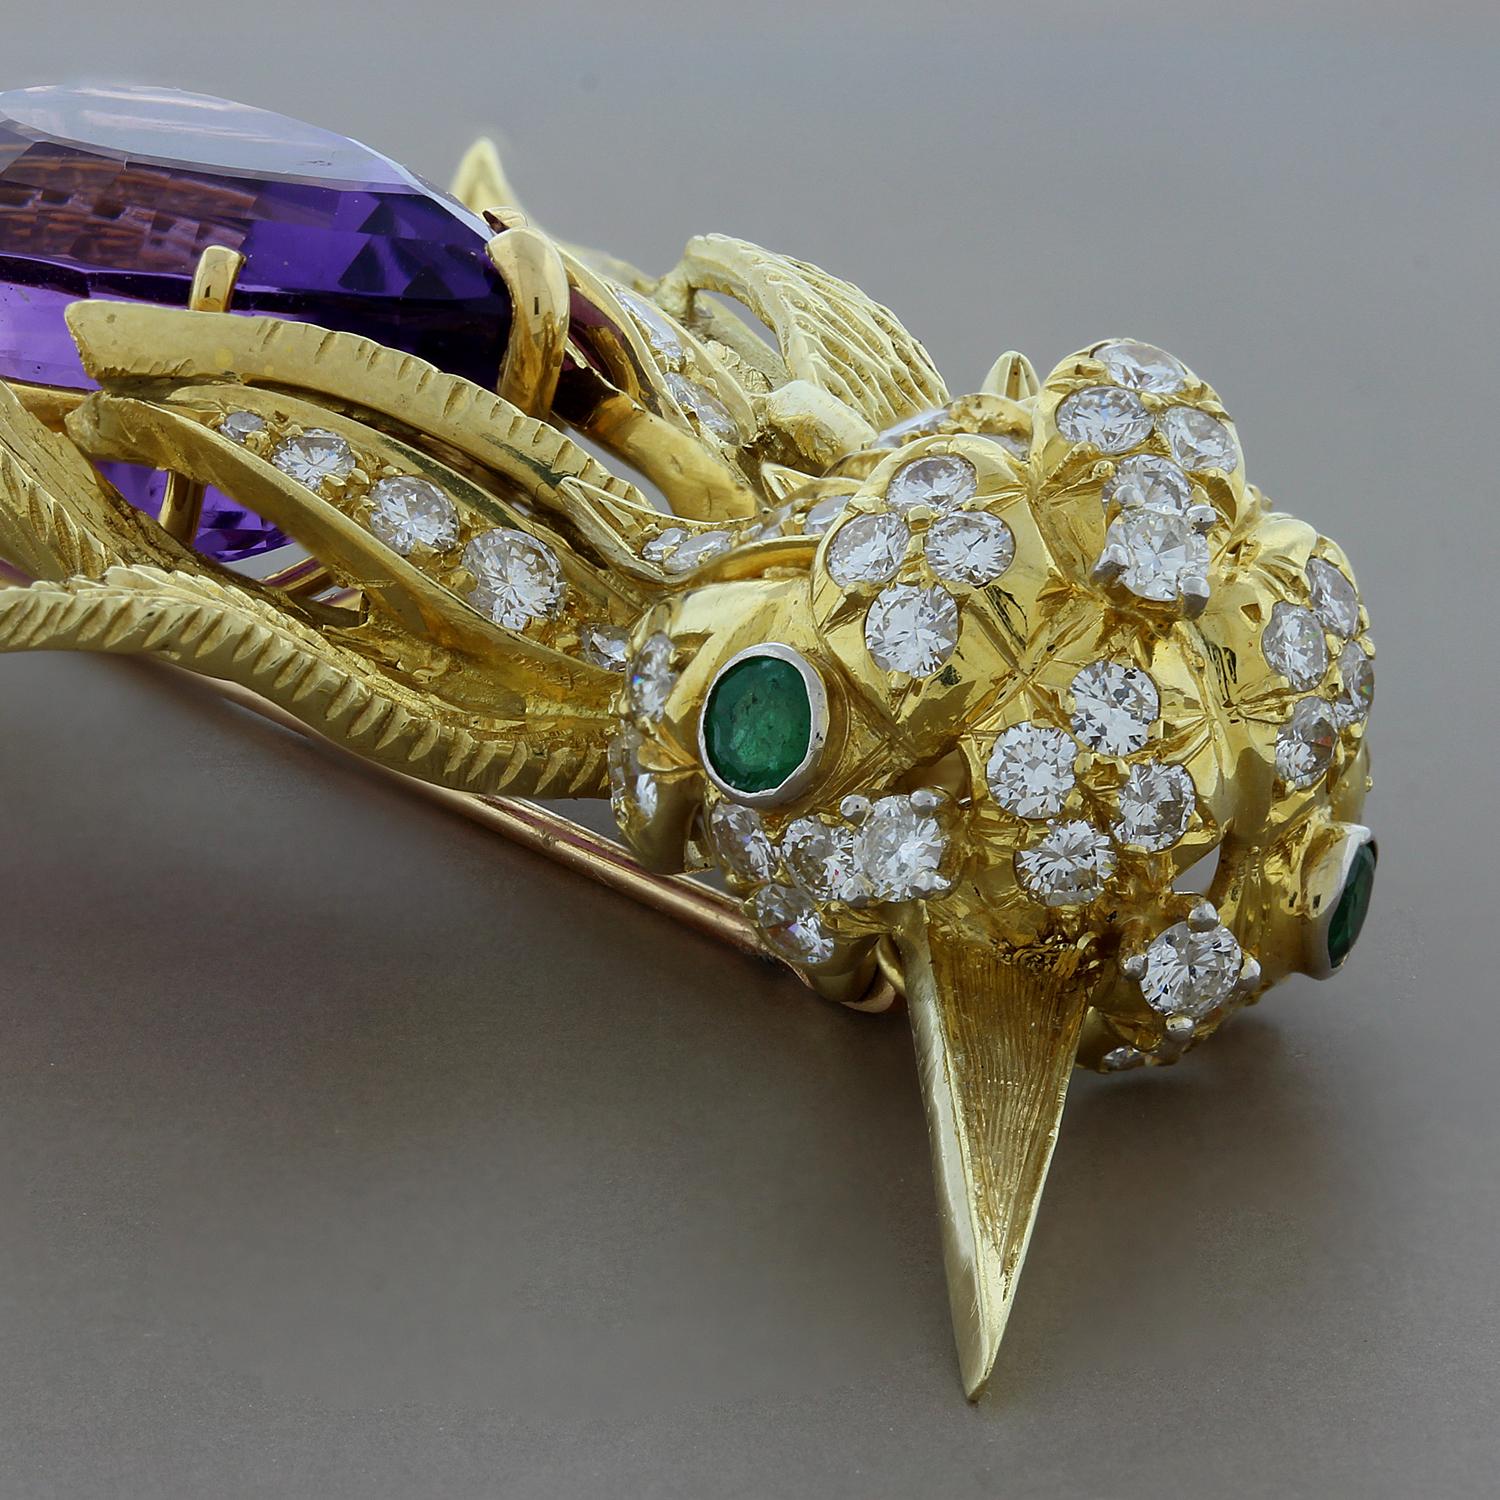 This soaring humming bird features a 17.90 carat pear shape purple amethyst.  4.07 carats of VS quality round cut diamonds are set throughout the 18K yellow gold brooch. The eyes are set with 0.15 carats of round cut emeralds. The feathers of this